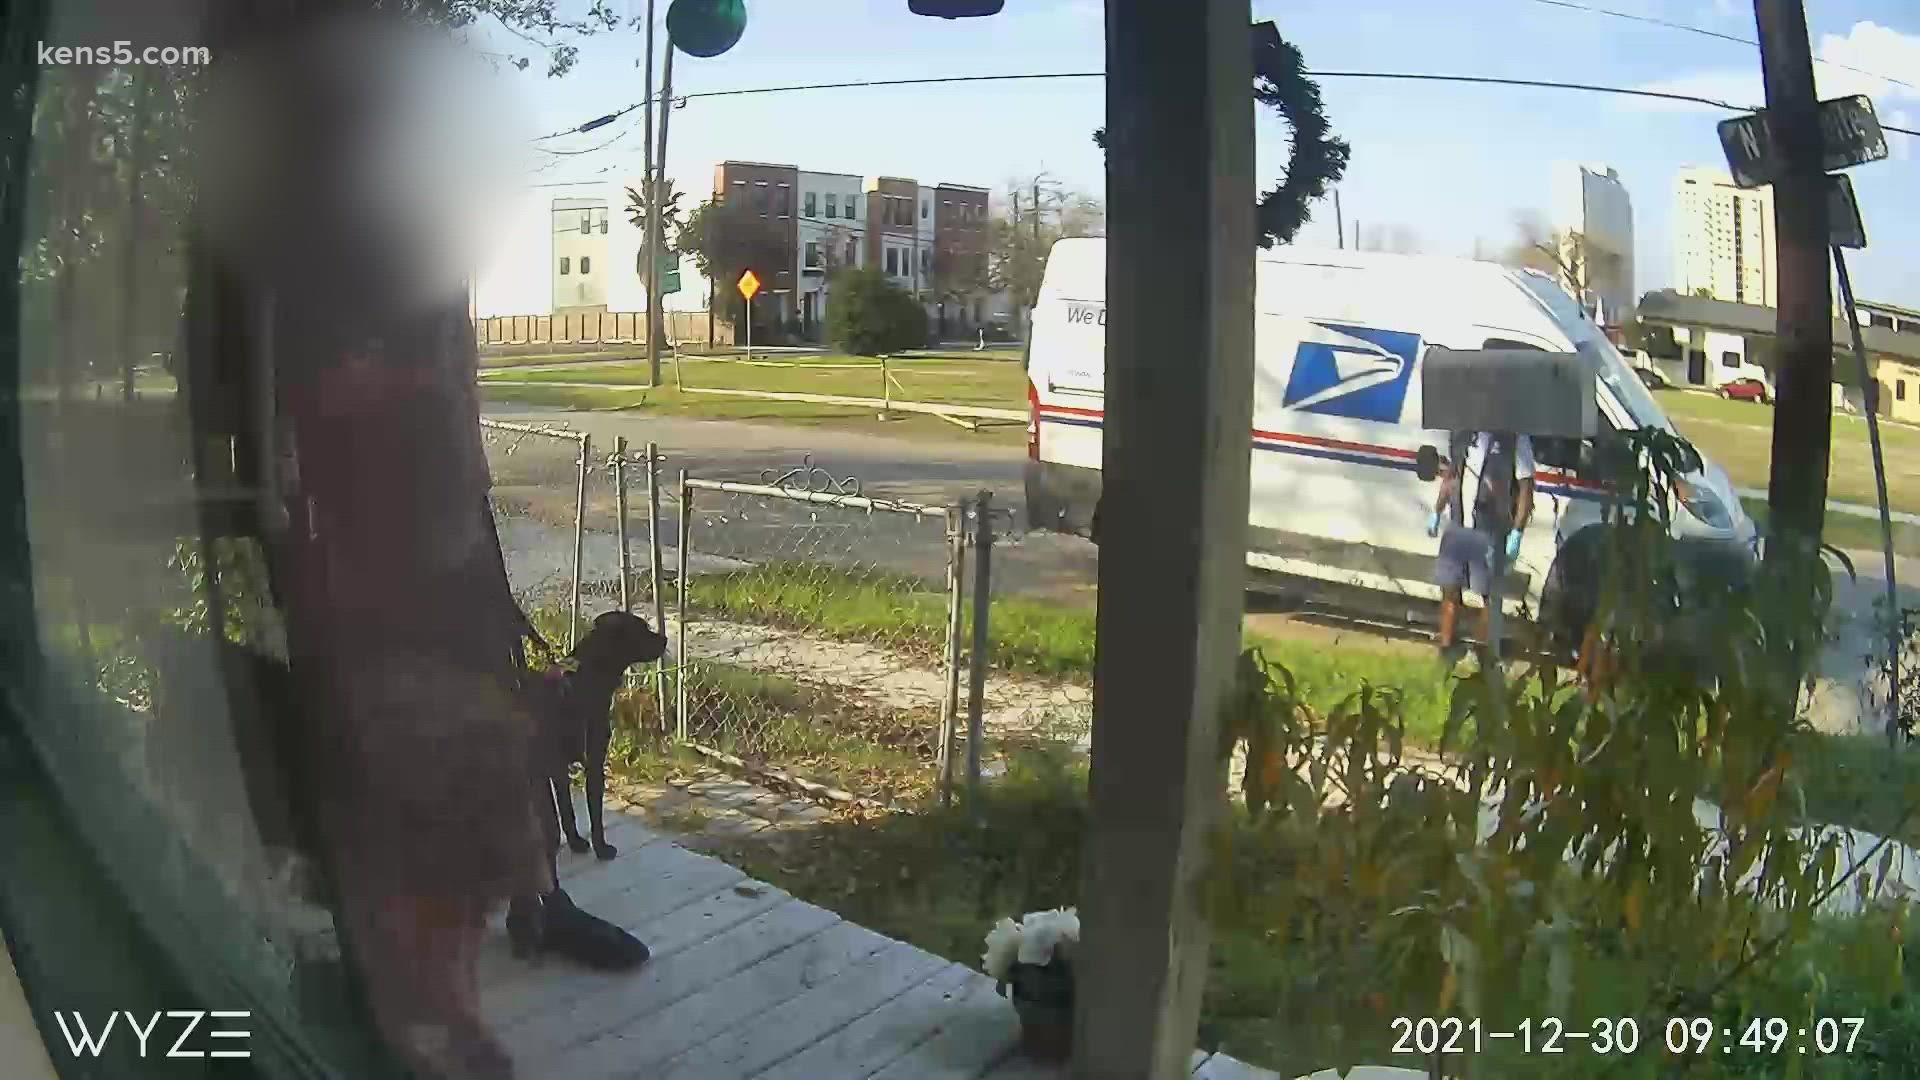 The man said this isn't the first time the postal worker has cursed at him along his mail route in the neighborhood.